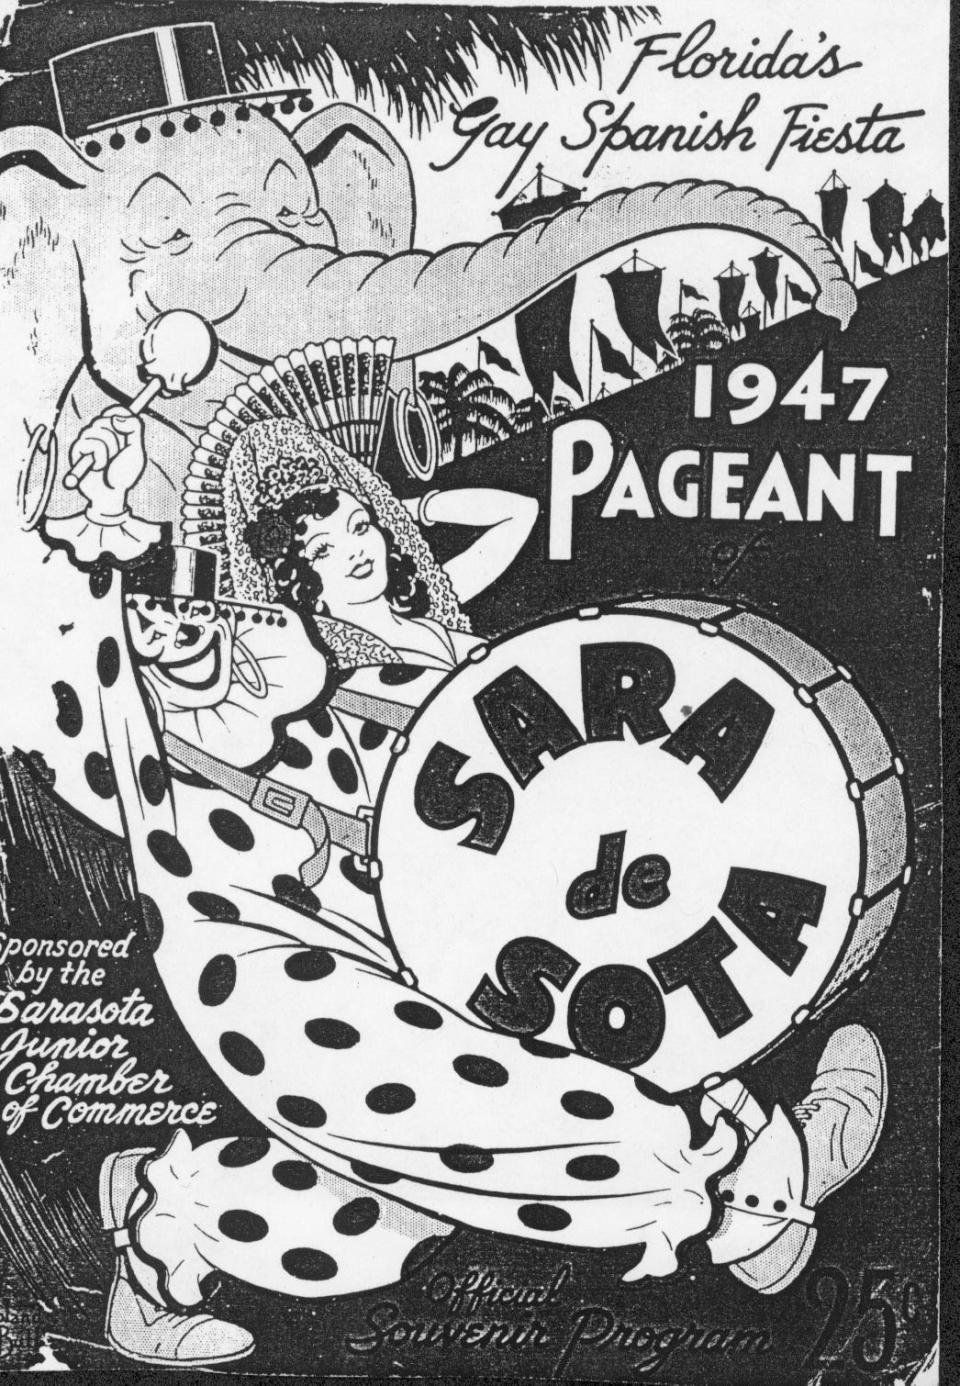 A brochure cover for the popular Sara de Sota Pageant, Sponsored by the Sarasota Chamber of Commerce, and managed for many years by the Junior Chamber.